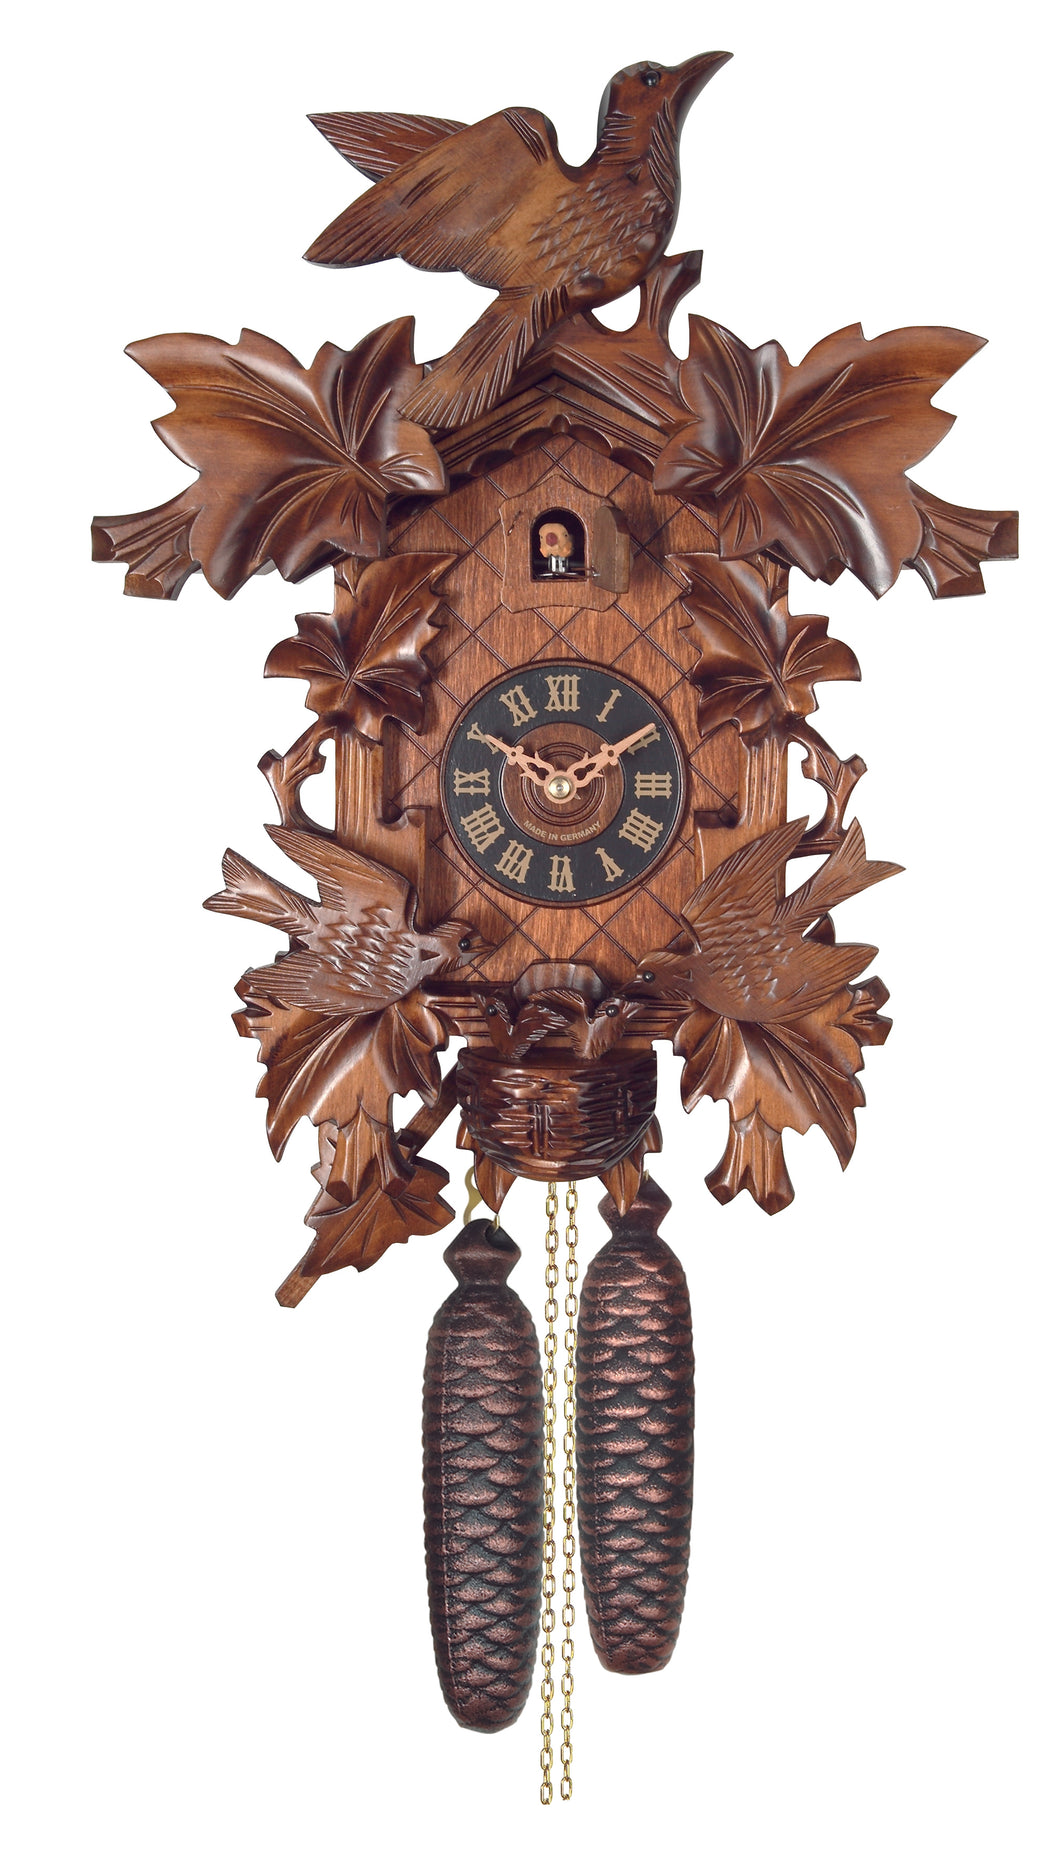 NEW - Large, Traditional Cuckoo with Moving Birds in Nest